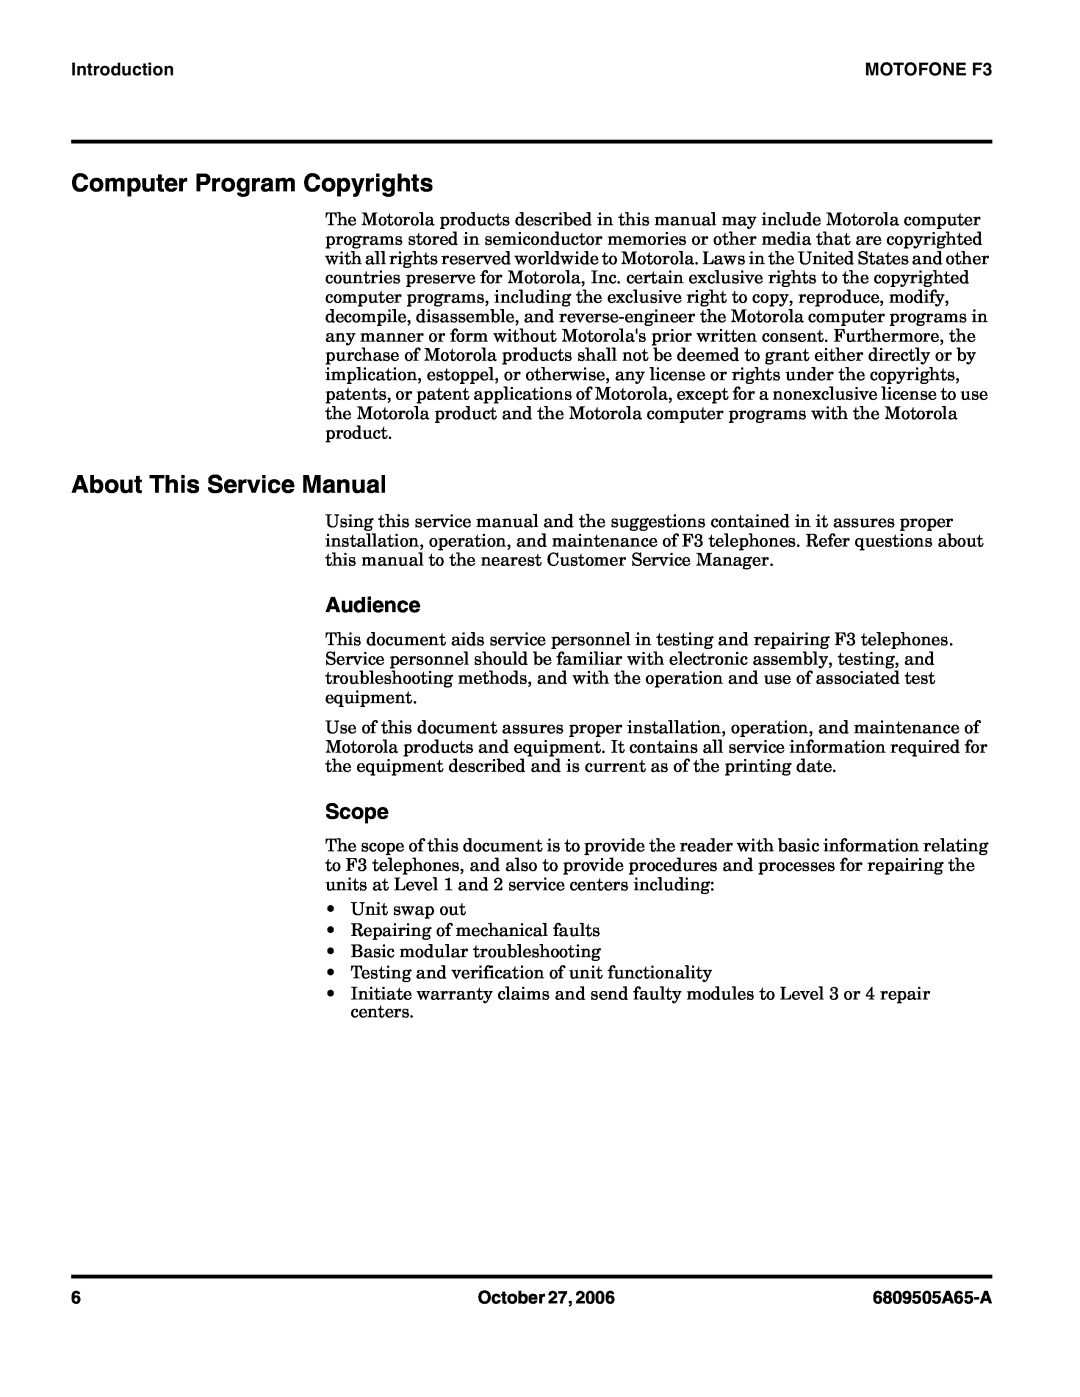 Motorola Computer Program Copyrights, About This Service Manual, Audience, Scope, Introduction, MOTOFONE F3, October 27 